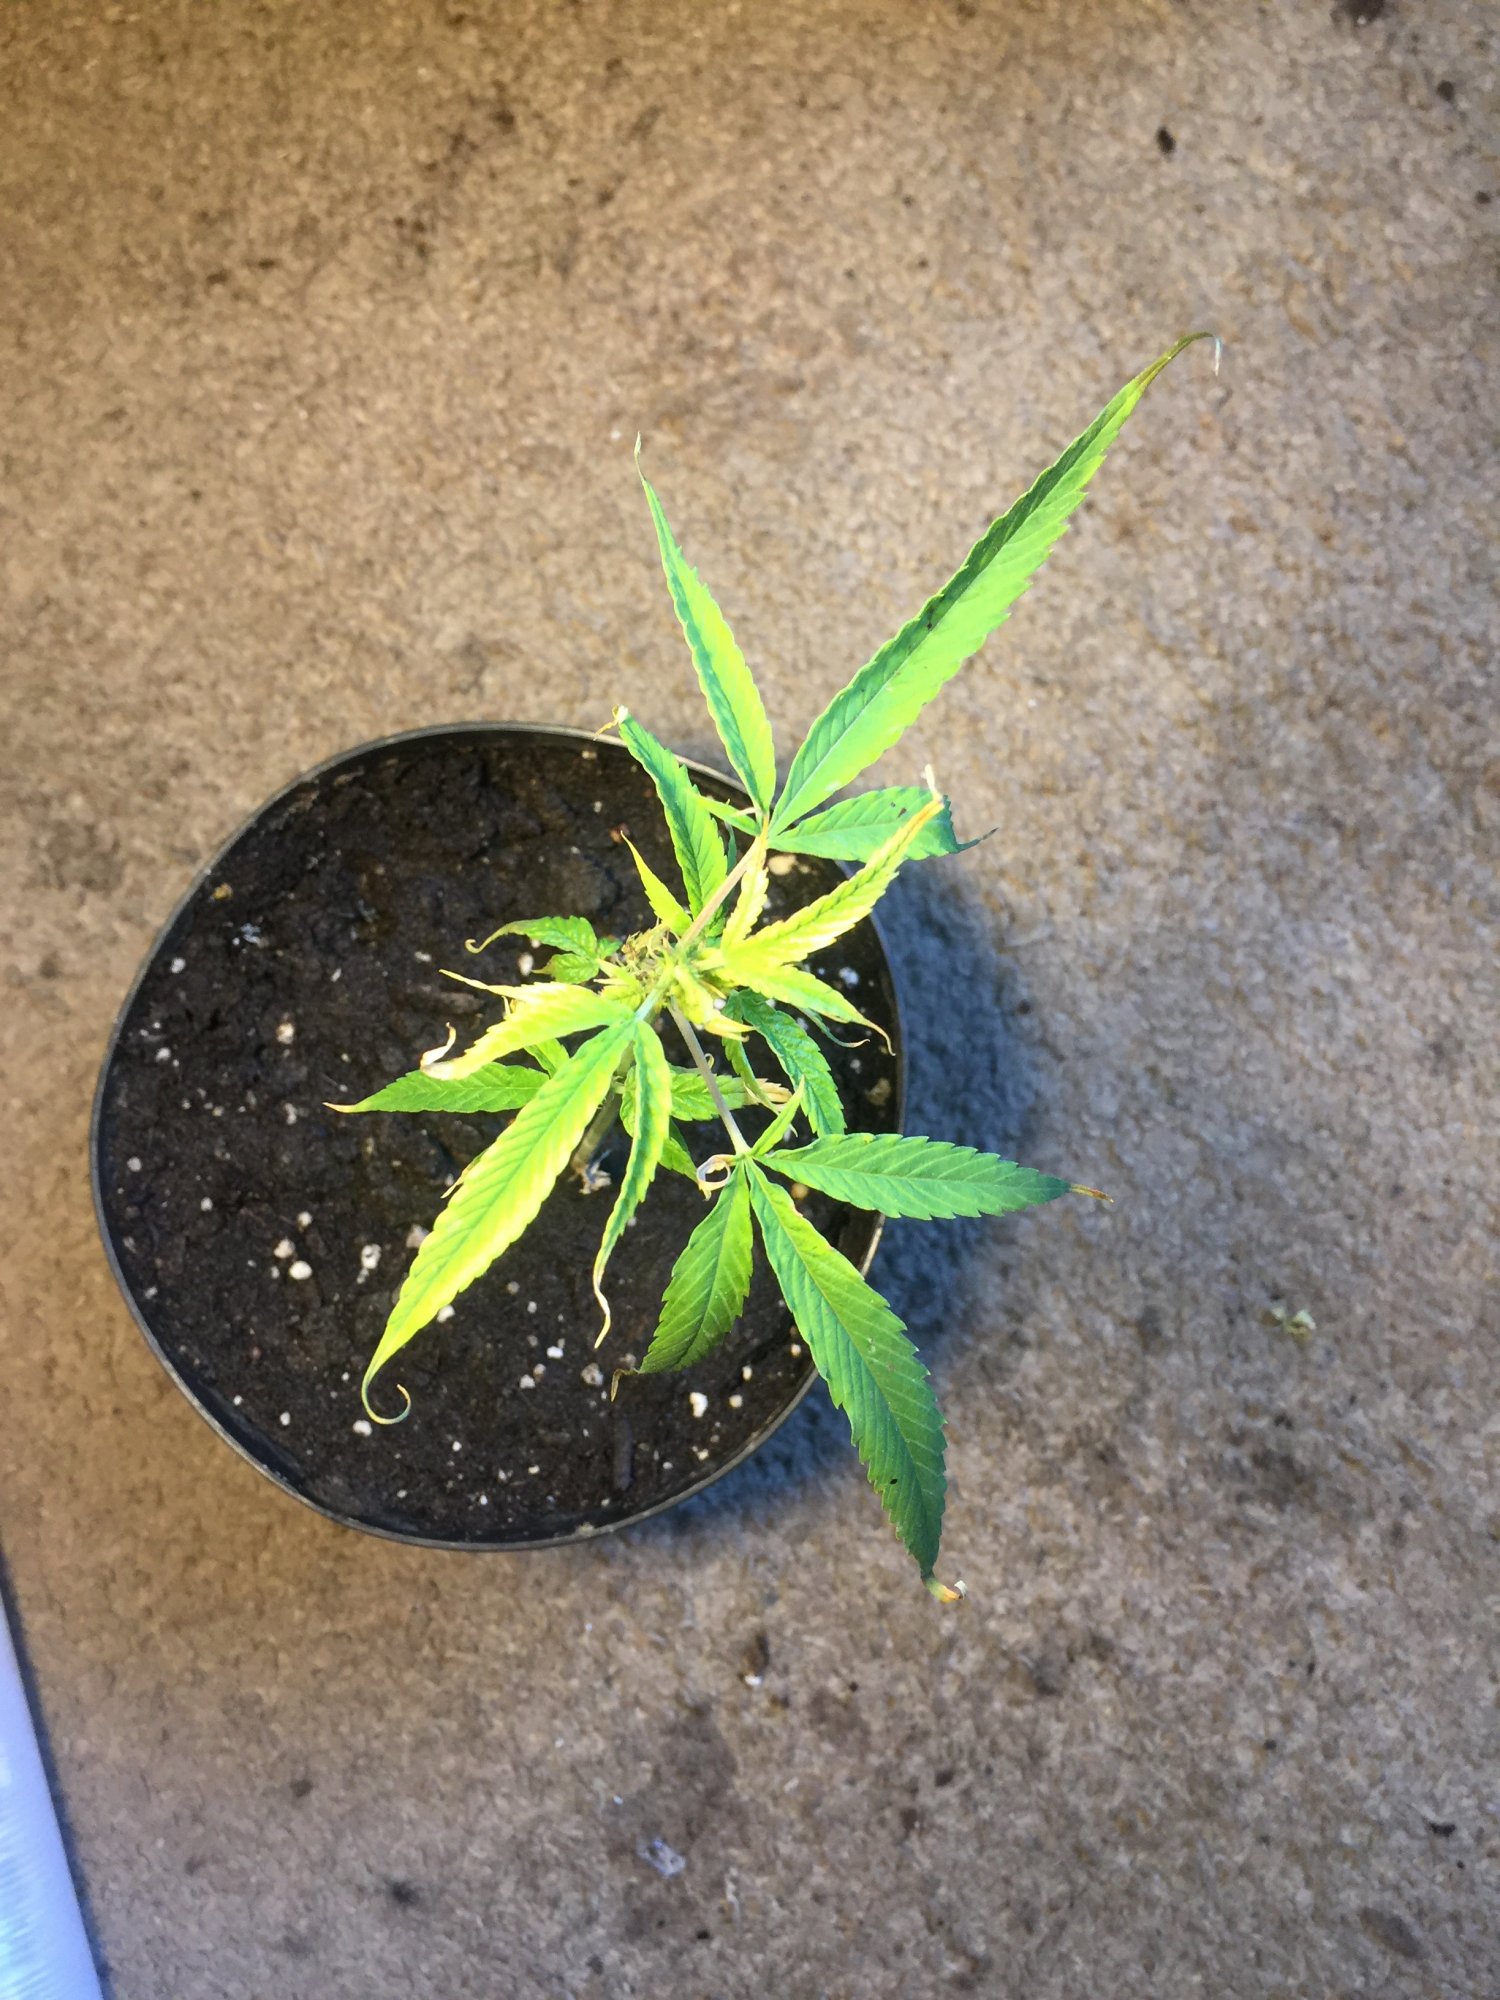 Please give me advice about my clones that are dying